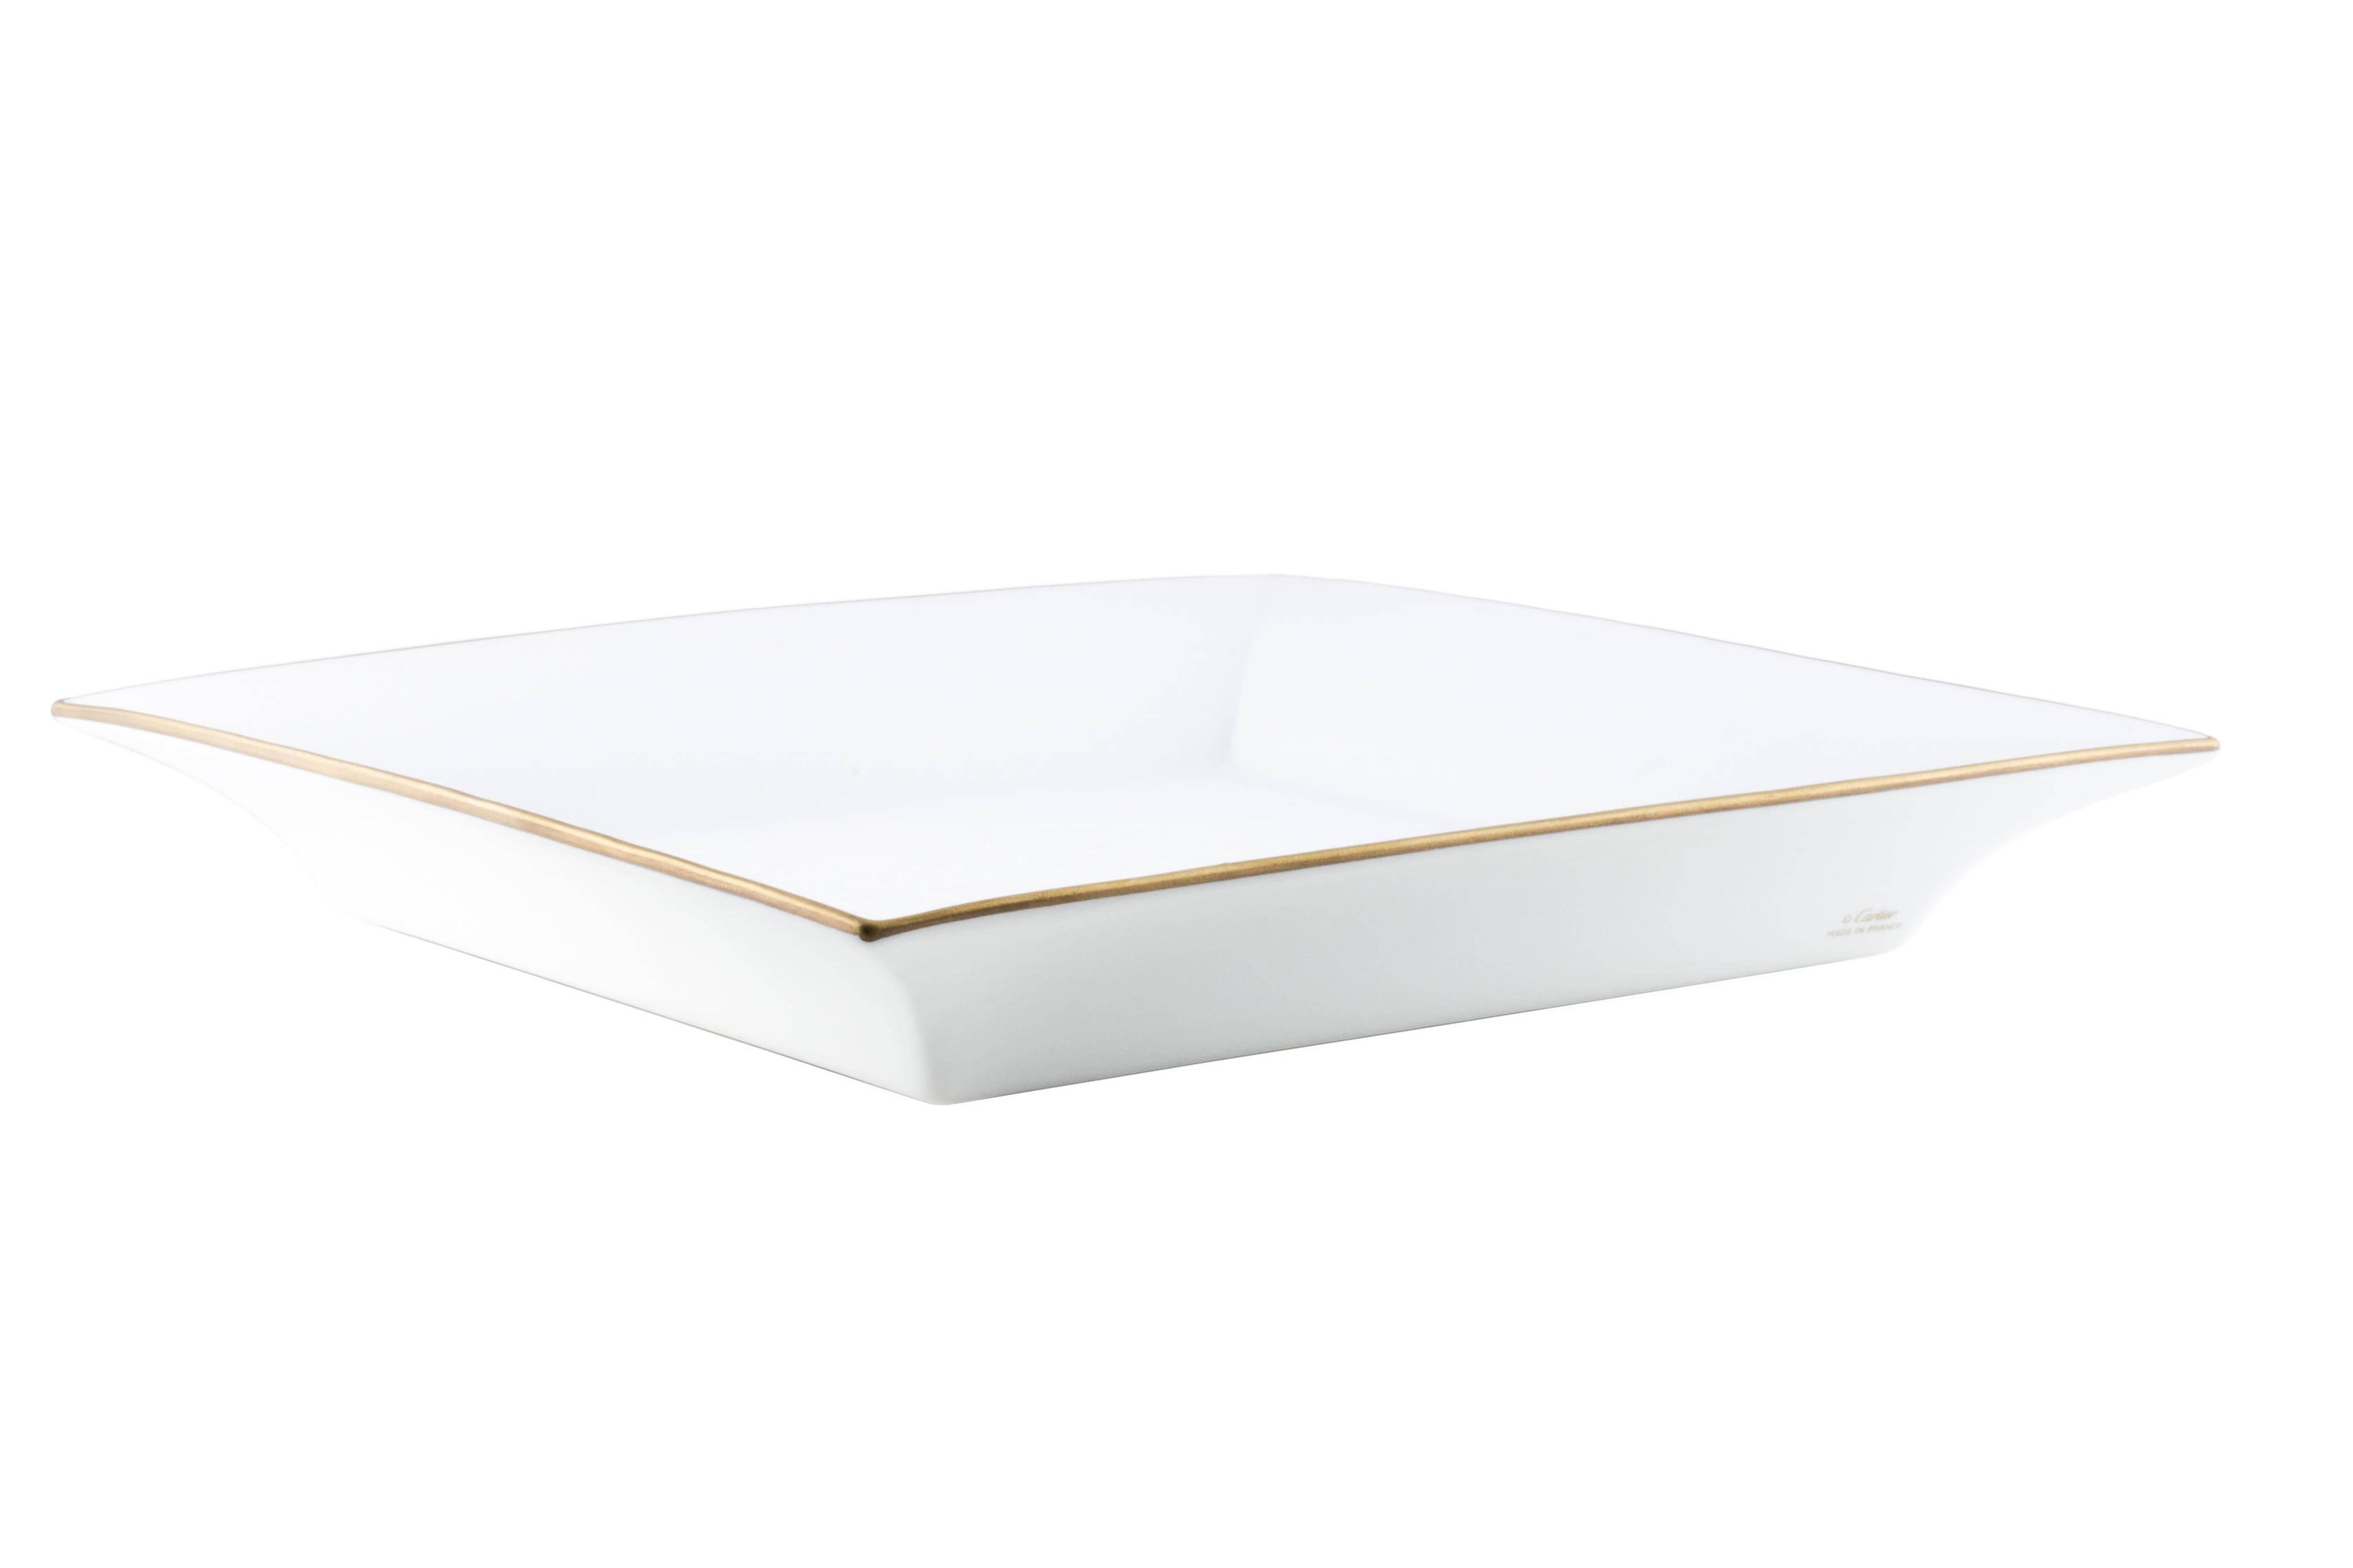 A stunning piece to accent any coffee table, buffet, office desk or vanity, this porcelain NEW Cartier tray features a Jaguar motif at the inset and rich gold trim. Original Cartier box included.

Porcelain
Gold trim
Signed underside
Made in